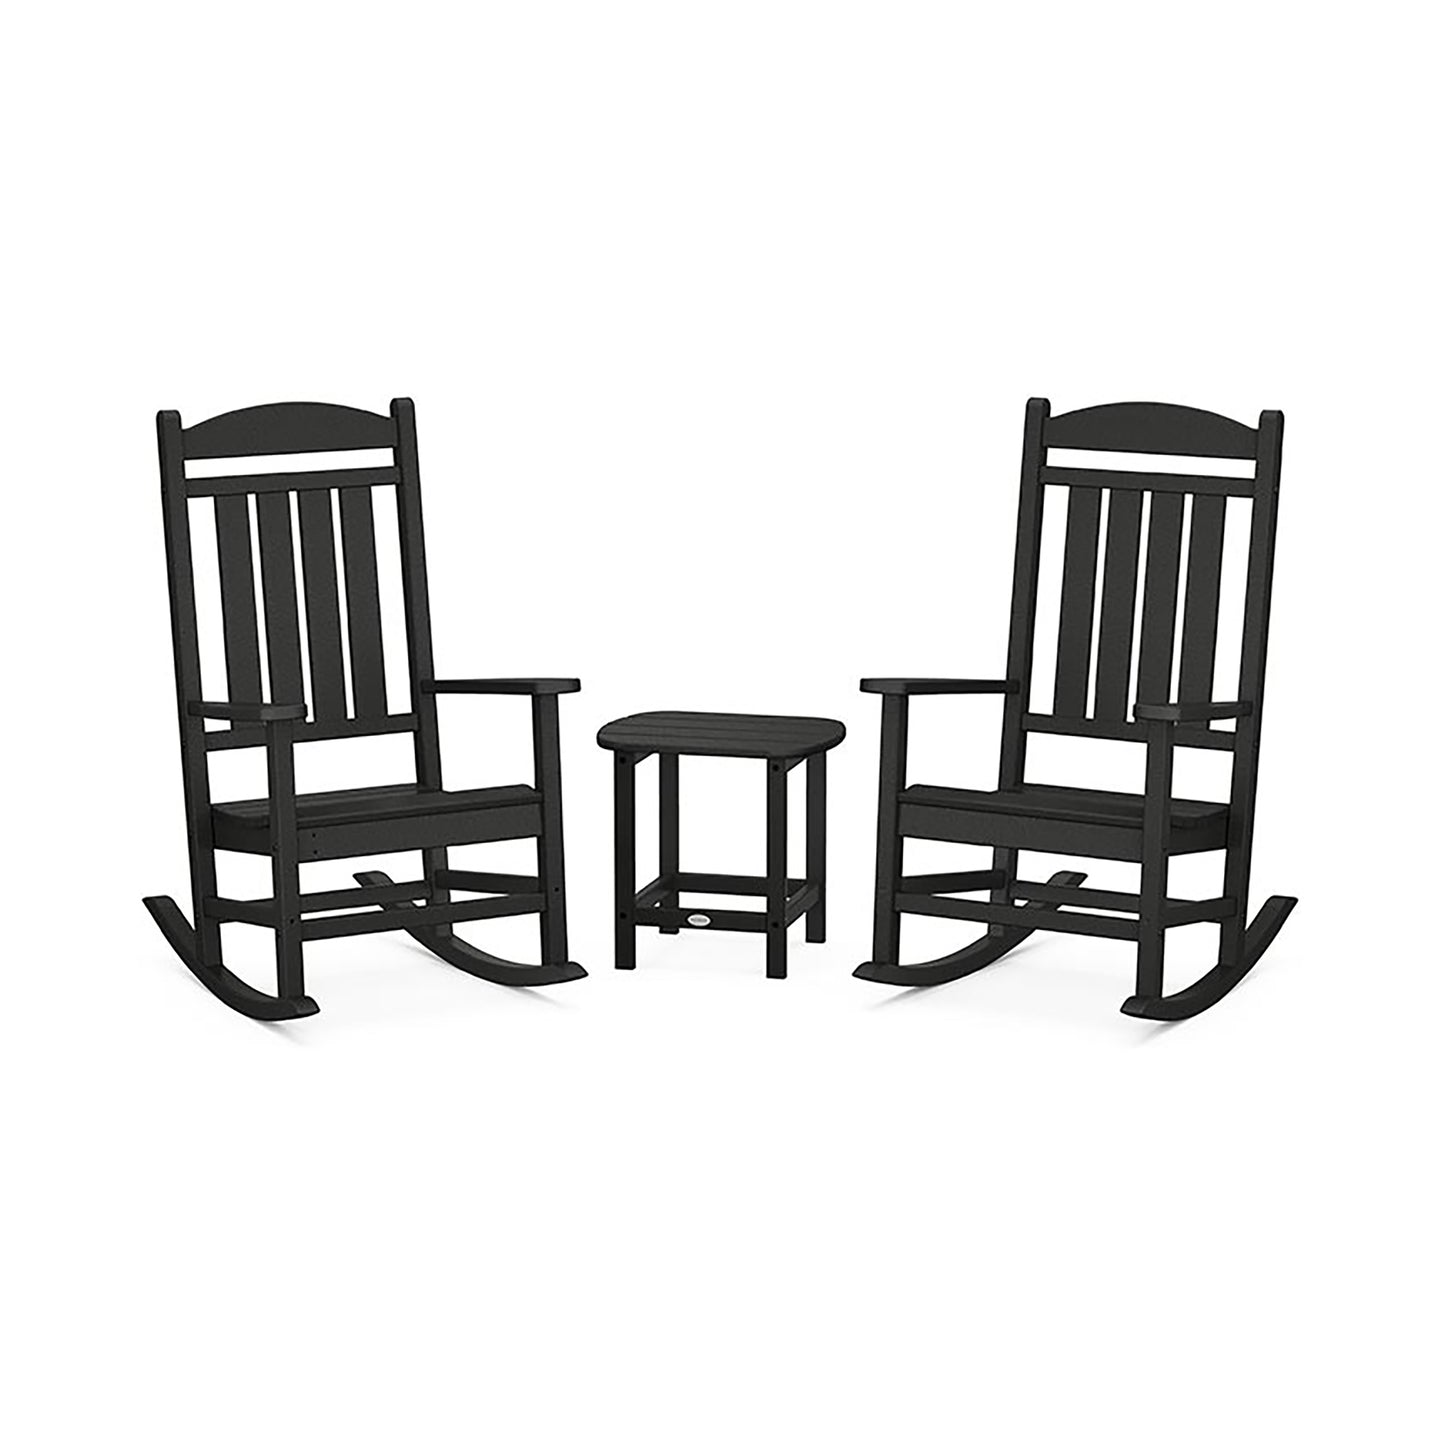 Two black POLYWOOD Presidential Outdoor Rocking Chairs facing each other with a small matching stool placed between them on a white background.